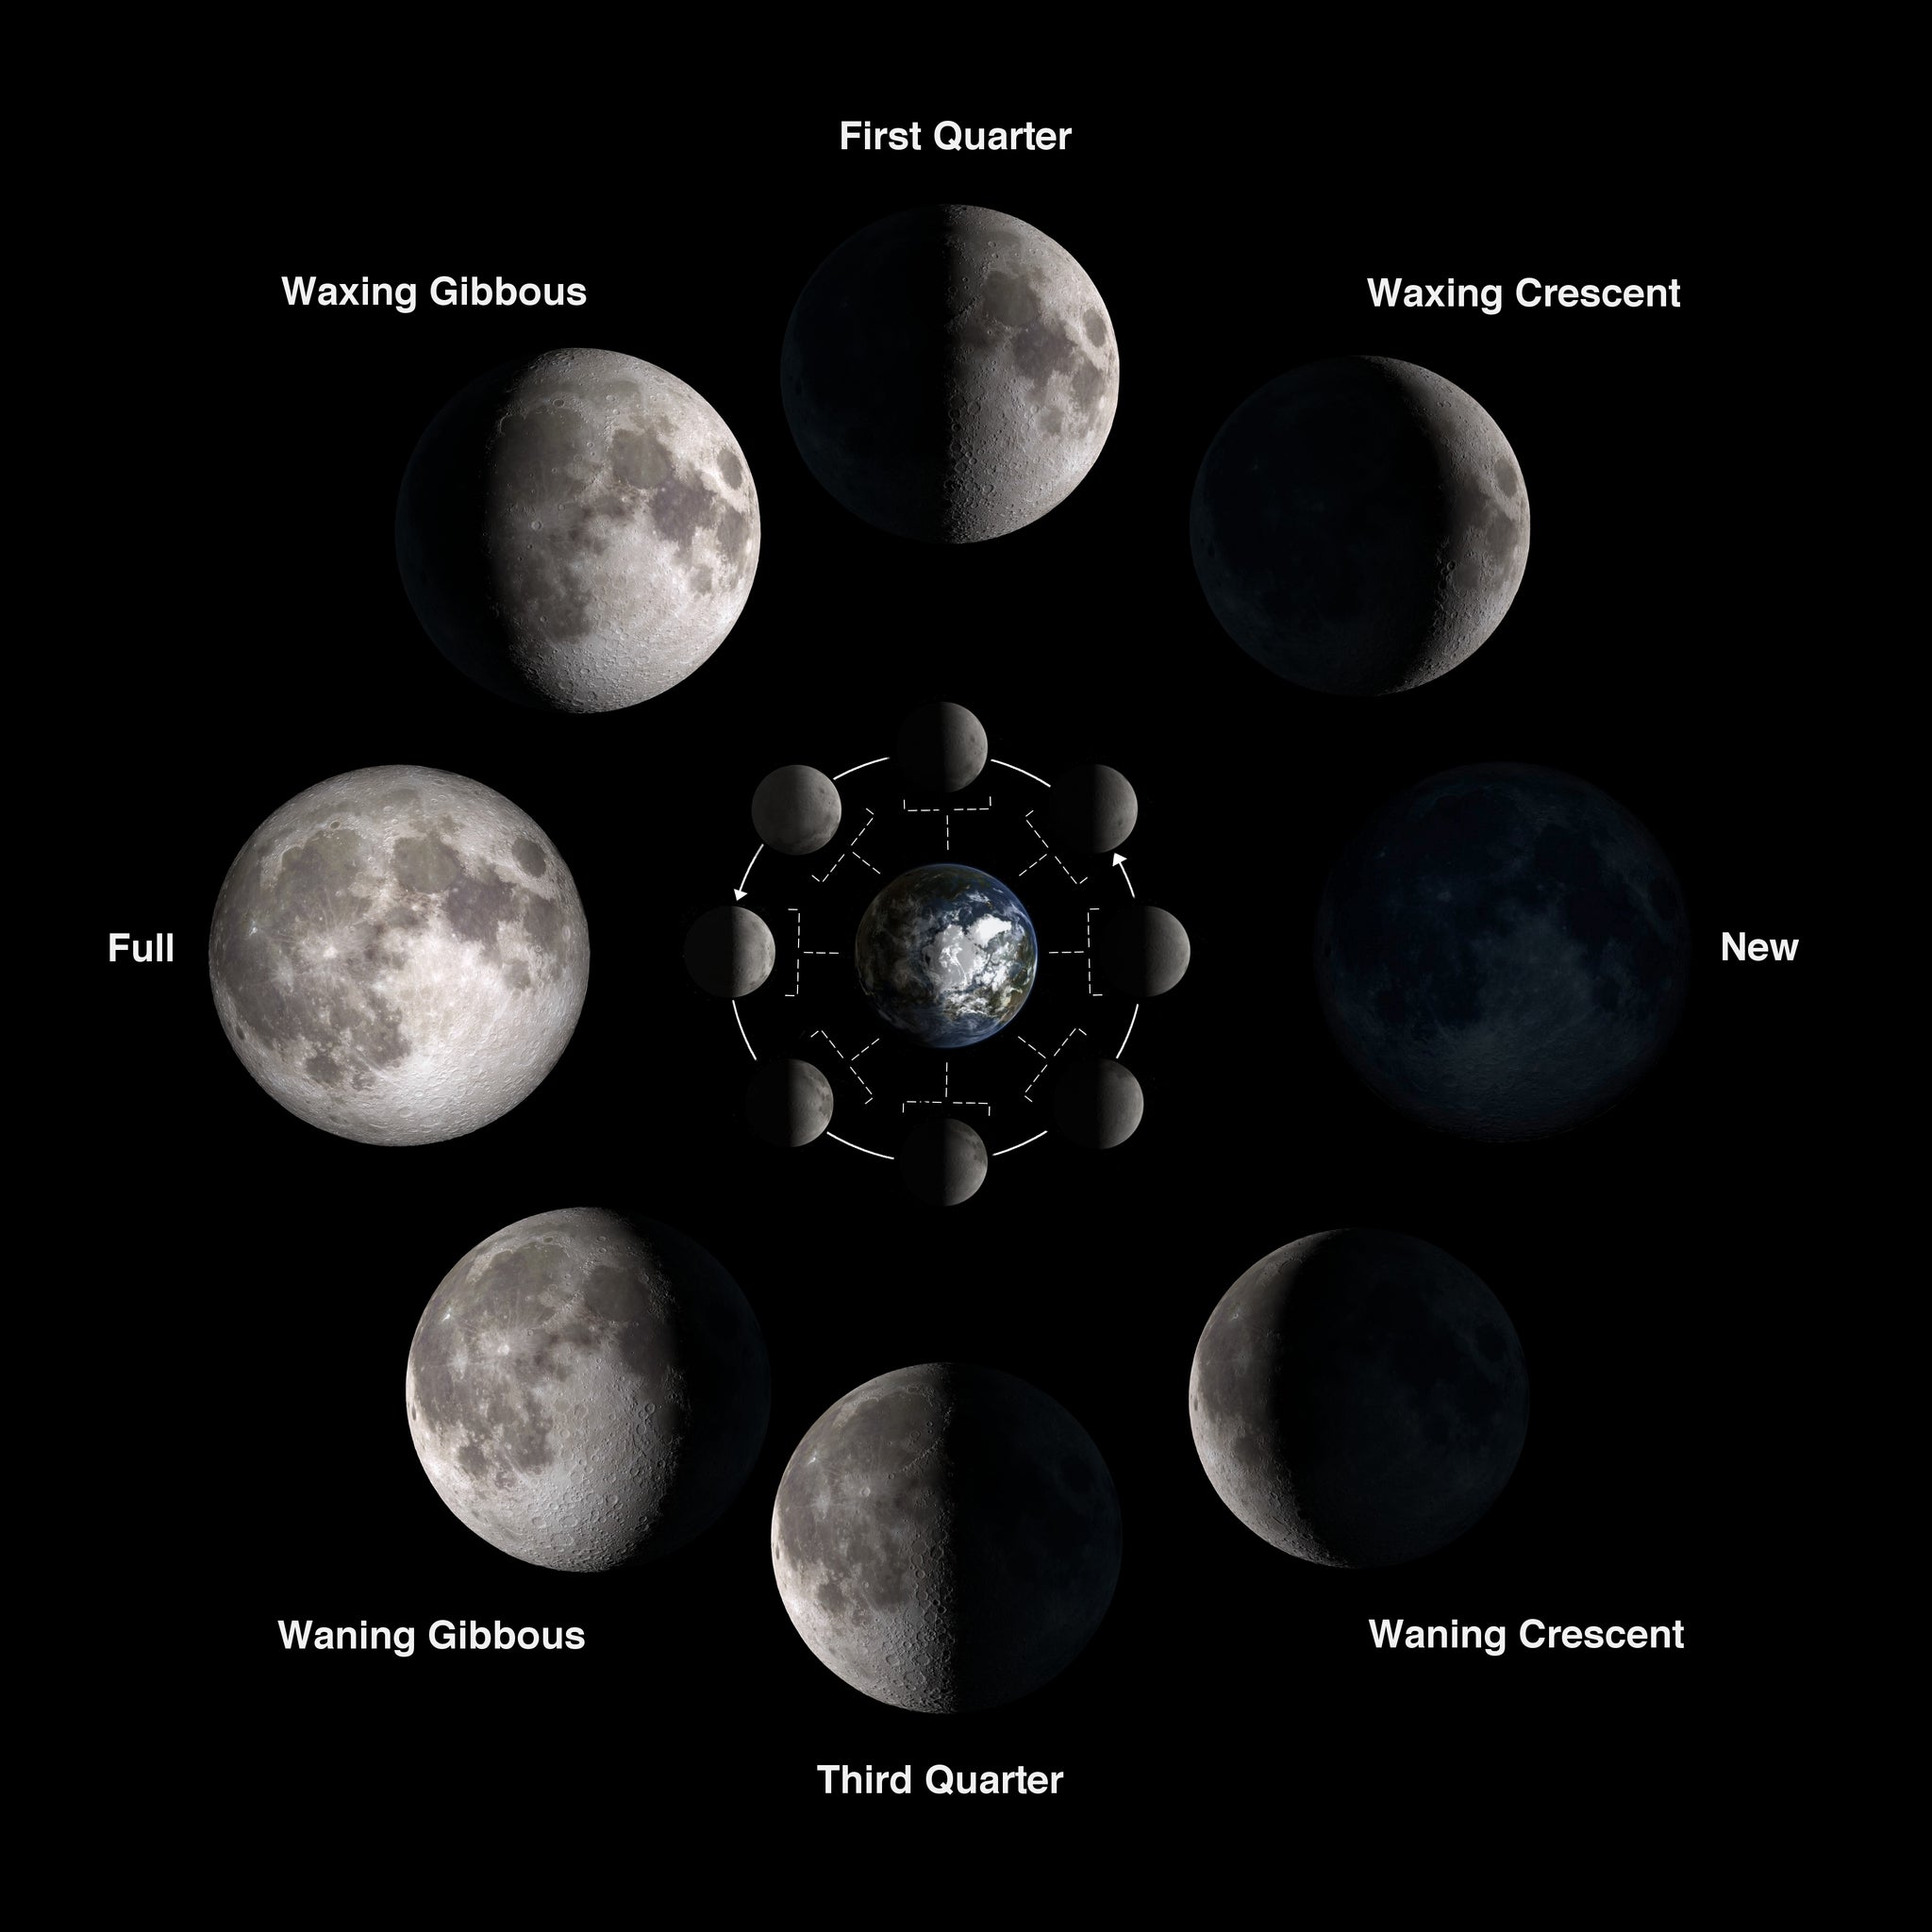 Moon Cycle and Phases